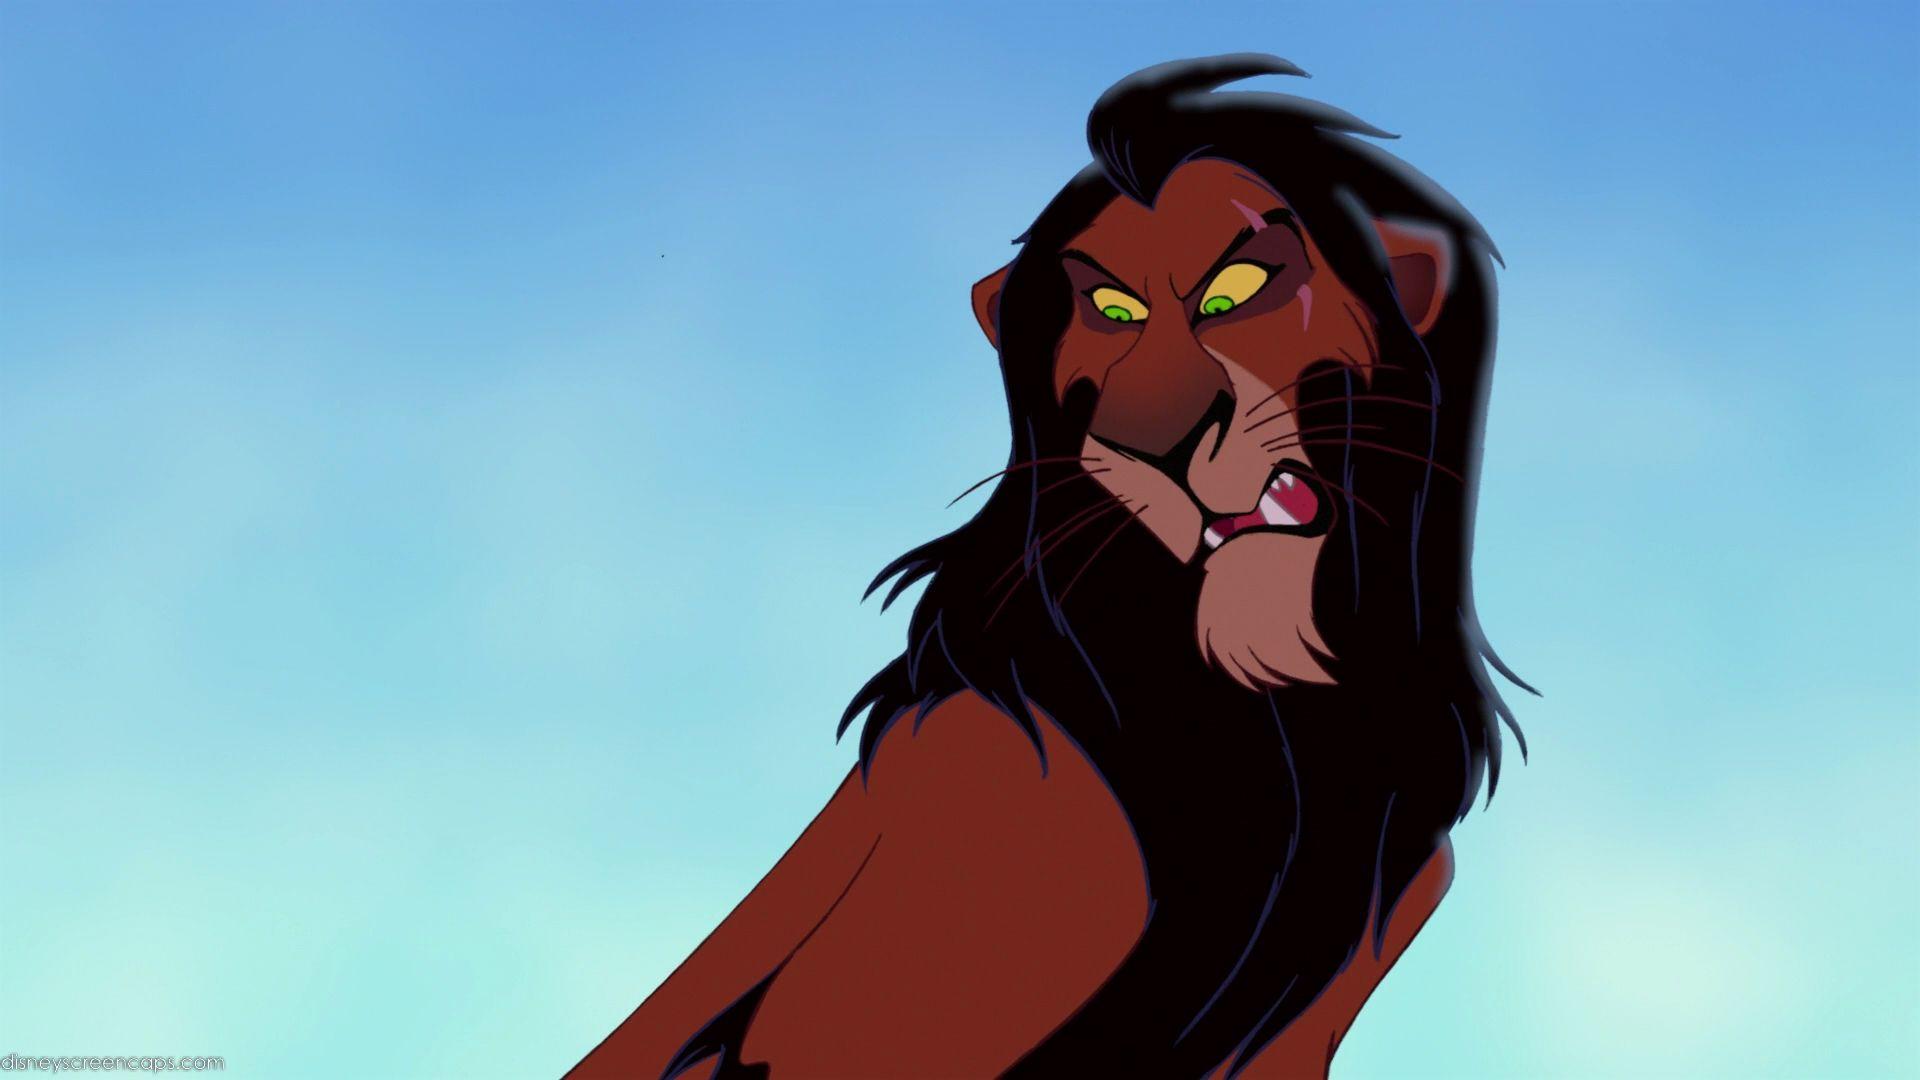 Disney May Have Just Found The Voice Of Scar In Their Live Action